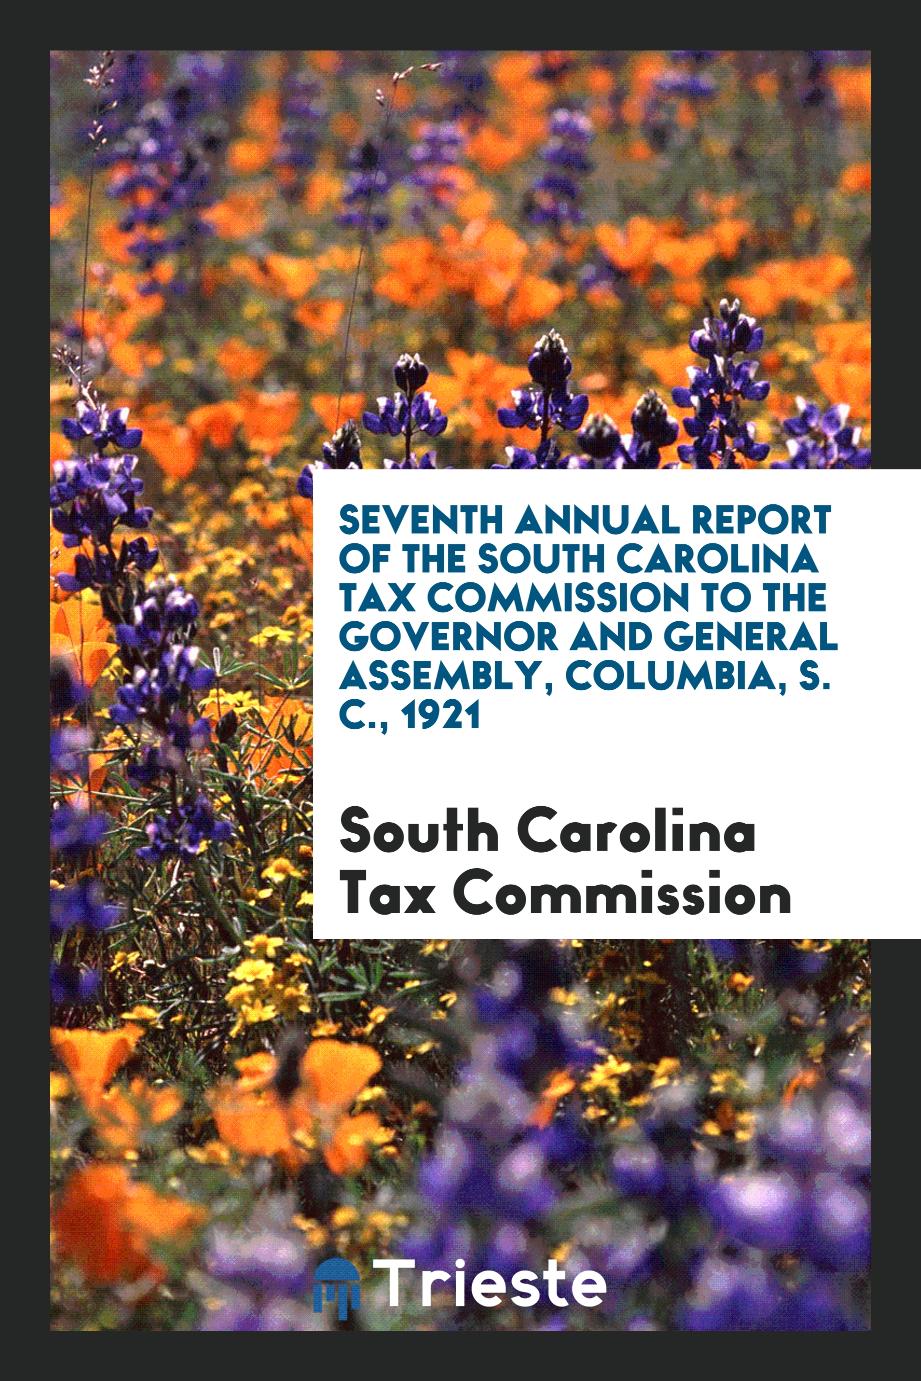 Seventh Annual Report of the South Carolina Tax Commission to the Governor and General Assembly, Columbia, S. C., 1921